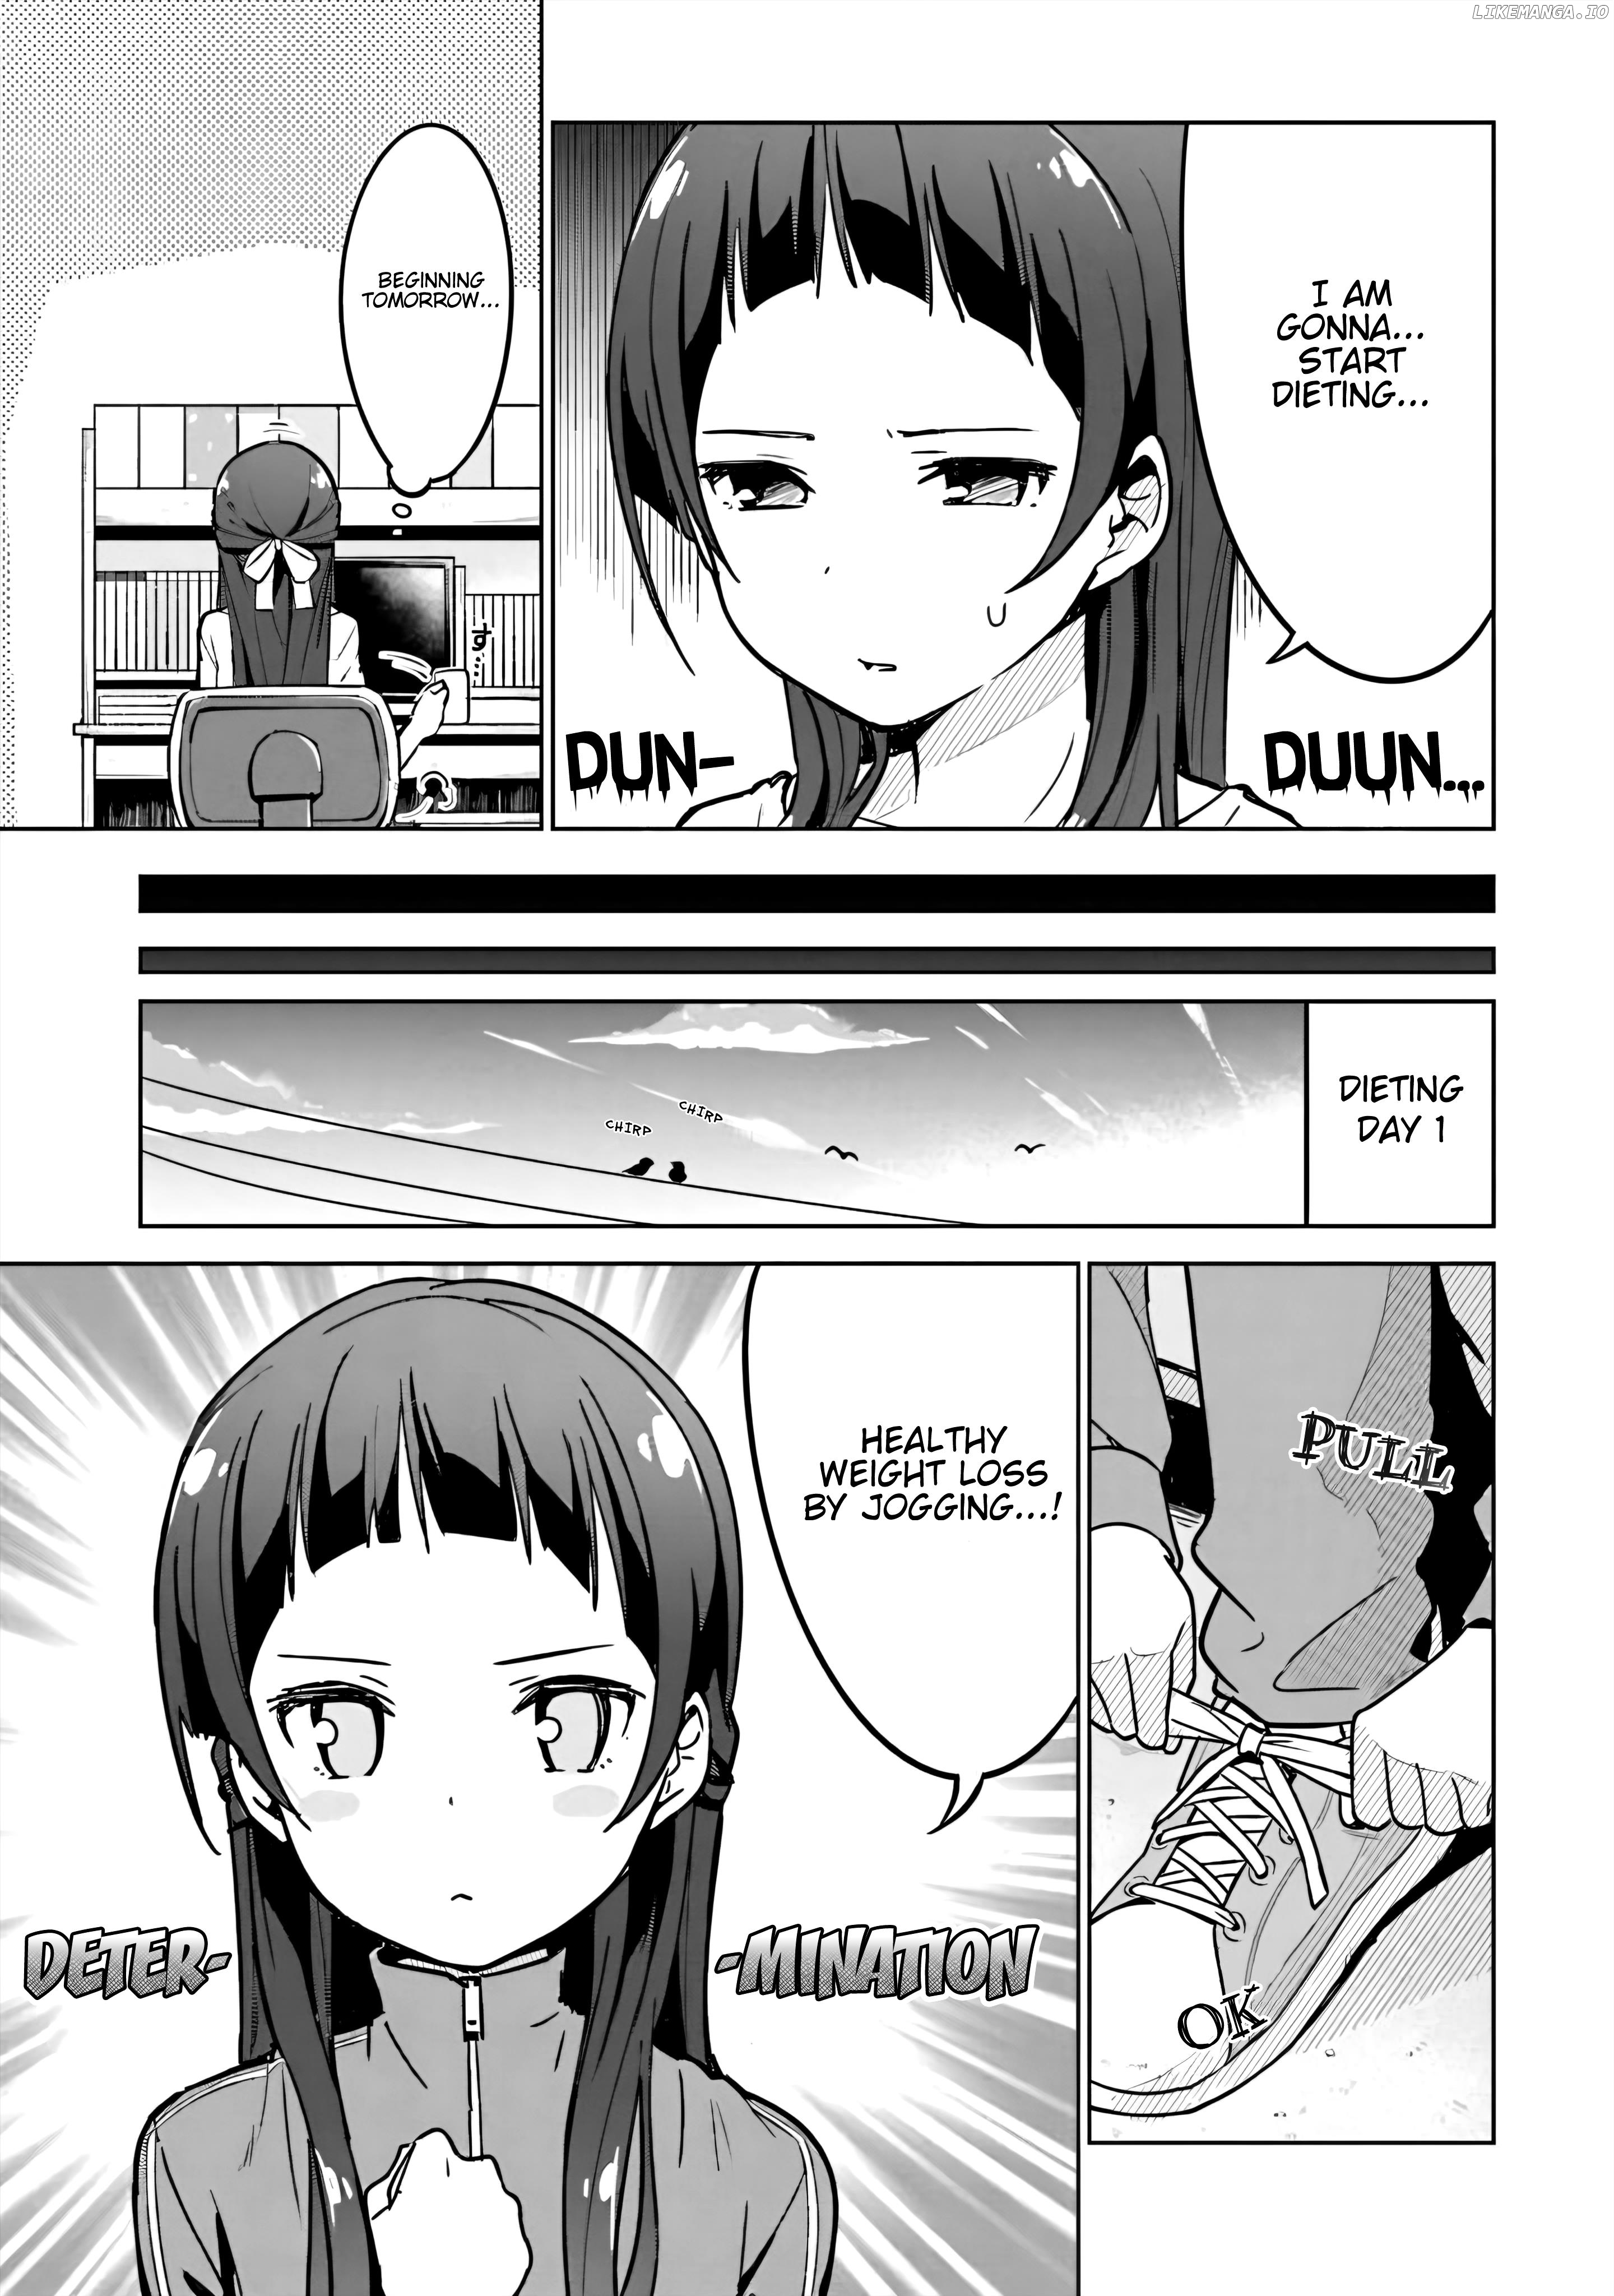 Sakura Quest Side Story: Ririko Oribe's Daily Report Vol 1 chapter 4 - page 5